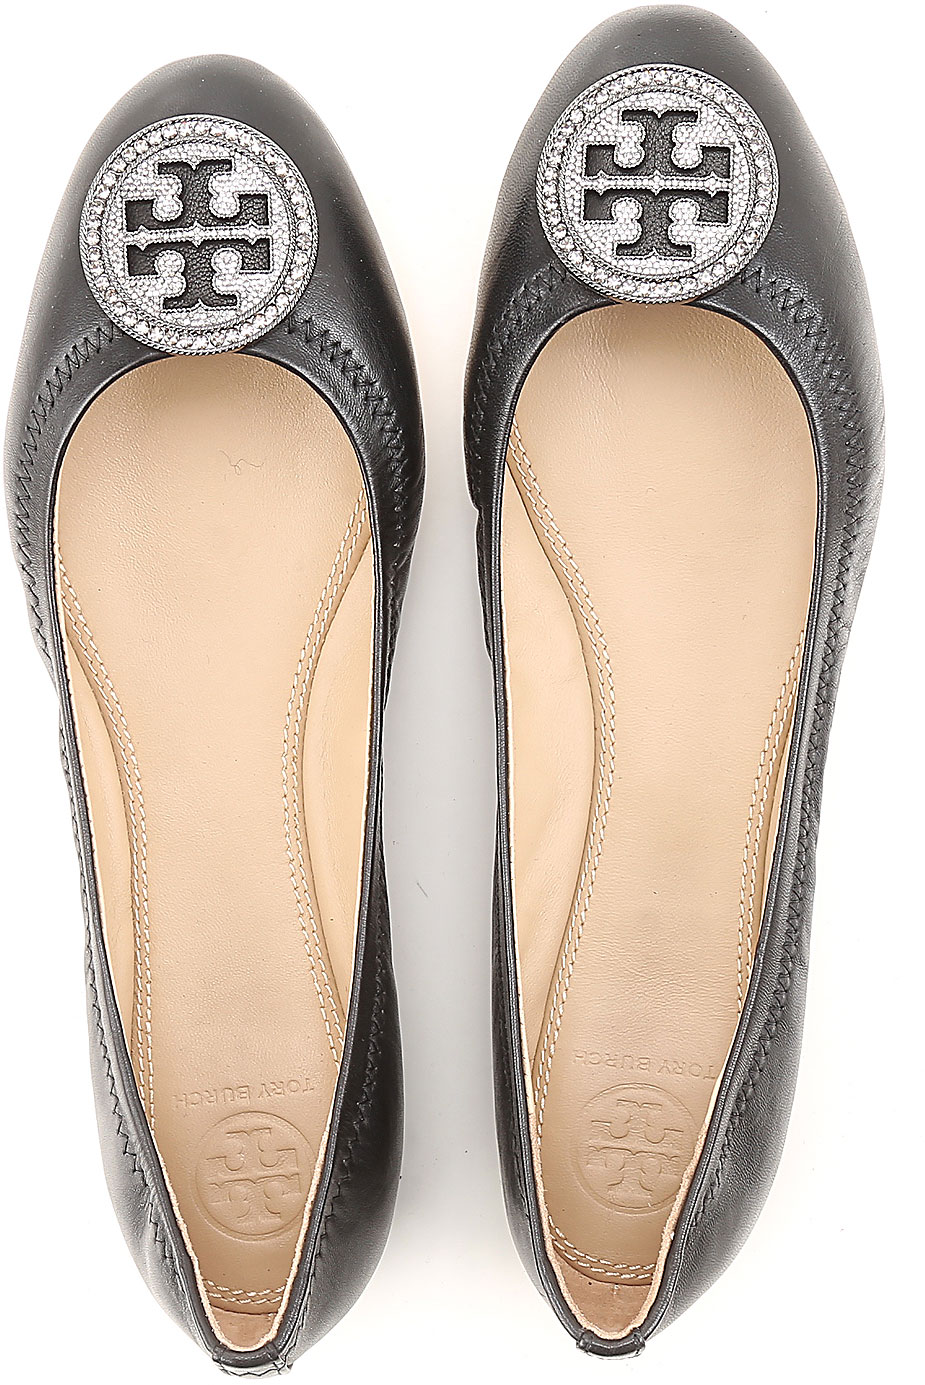 Womens Shoes Tory Burch Style Code 46084 001 9128